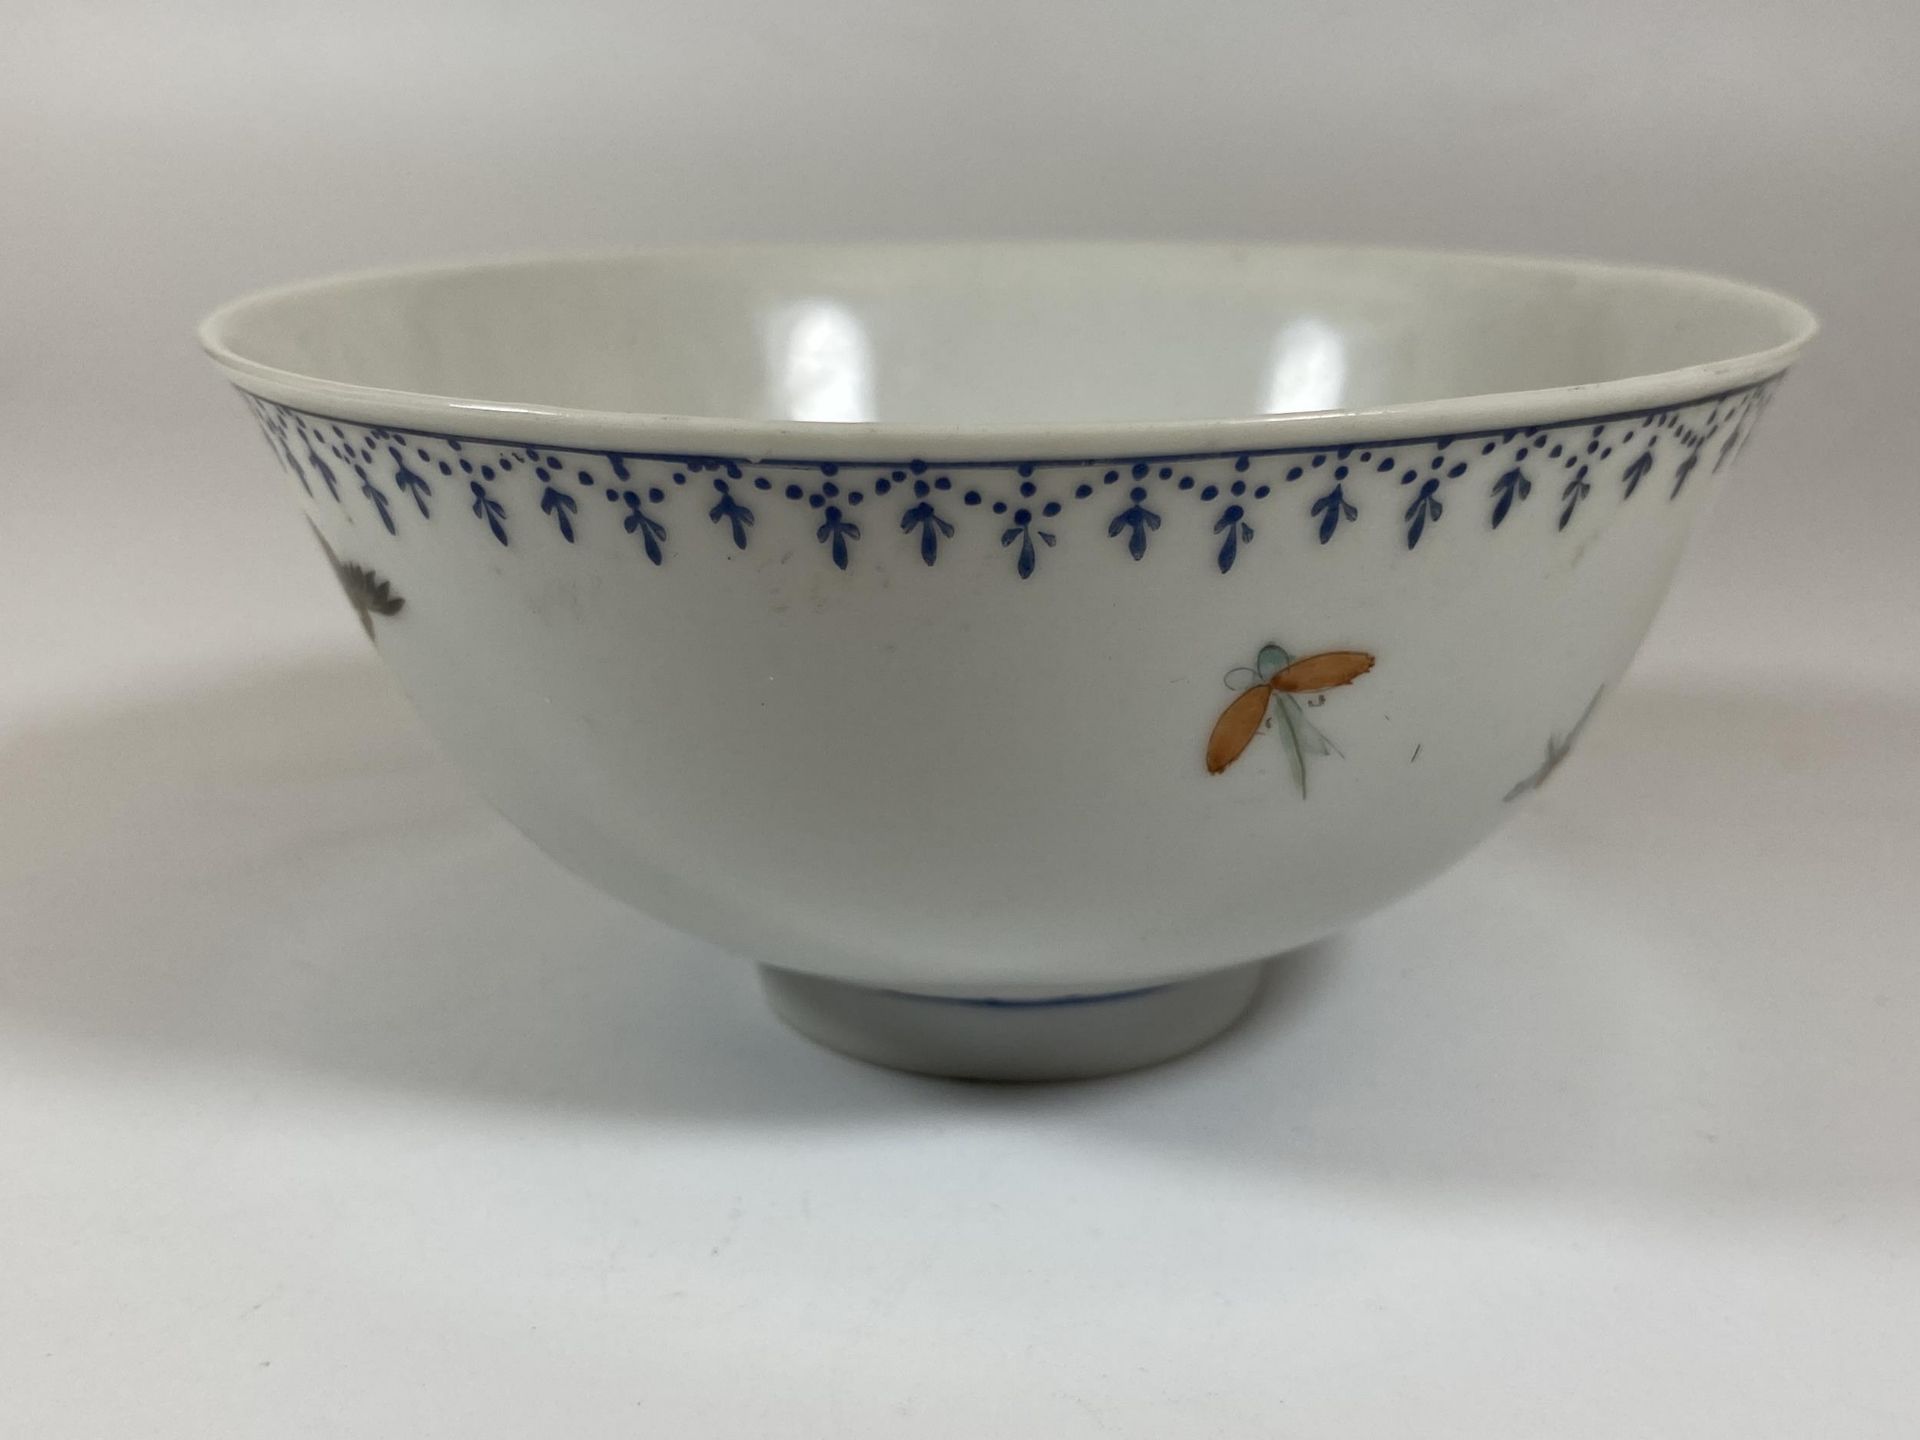 A CHINESE PORCELAIN BOWL WITH BIRD AND FLORAL DESIGN, QIANLONG SEAL MARK TO BASE, DIAMETER 12.5CM - Image 2 of 6